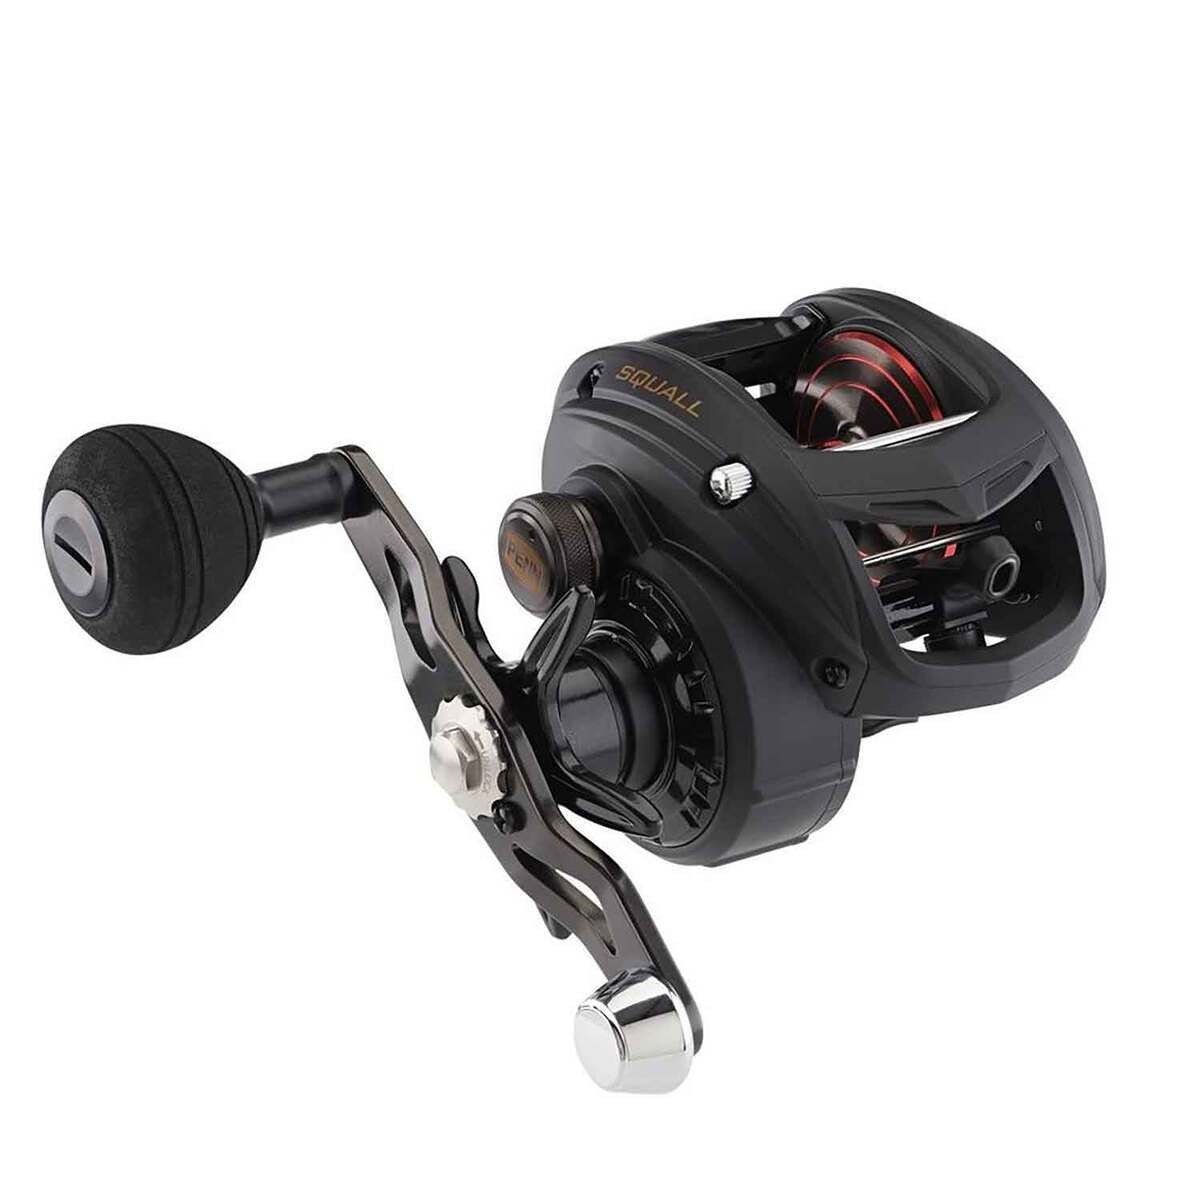 PENN Squall Low Profile Casting Reel - Size 200HS, Right Retrieve